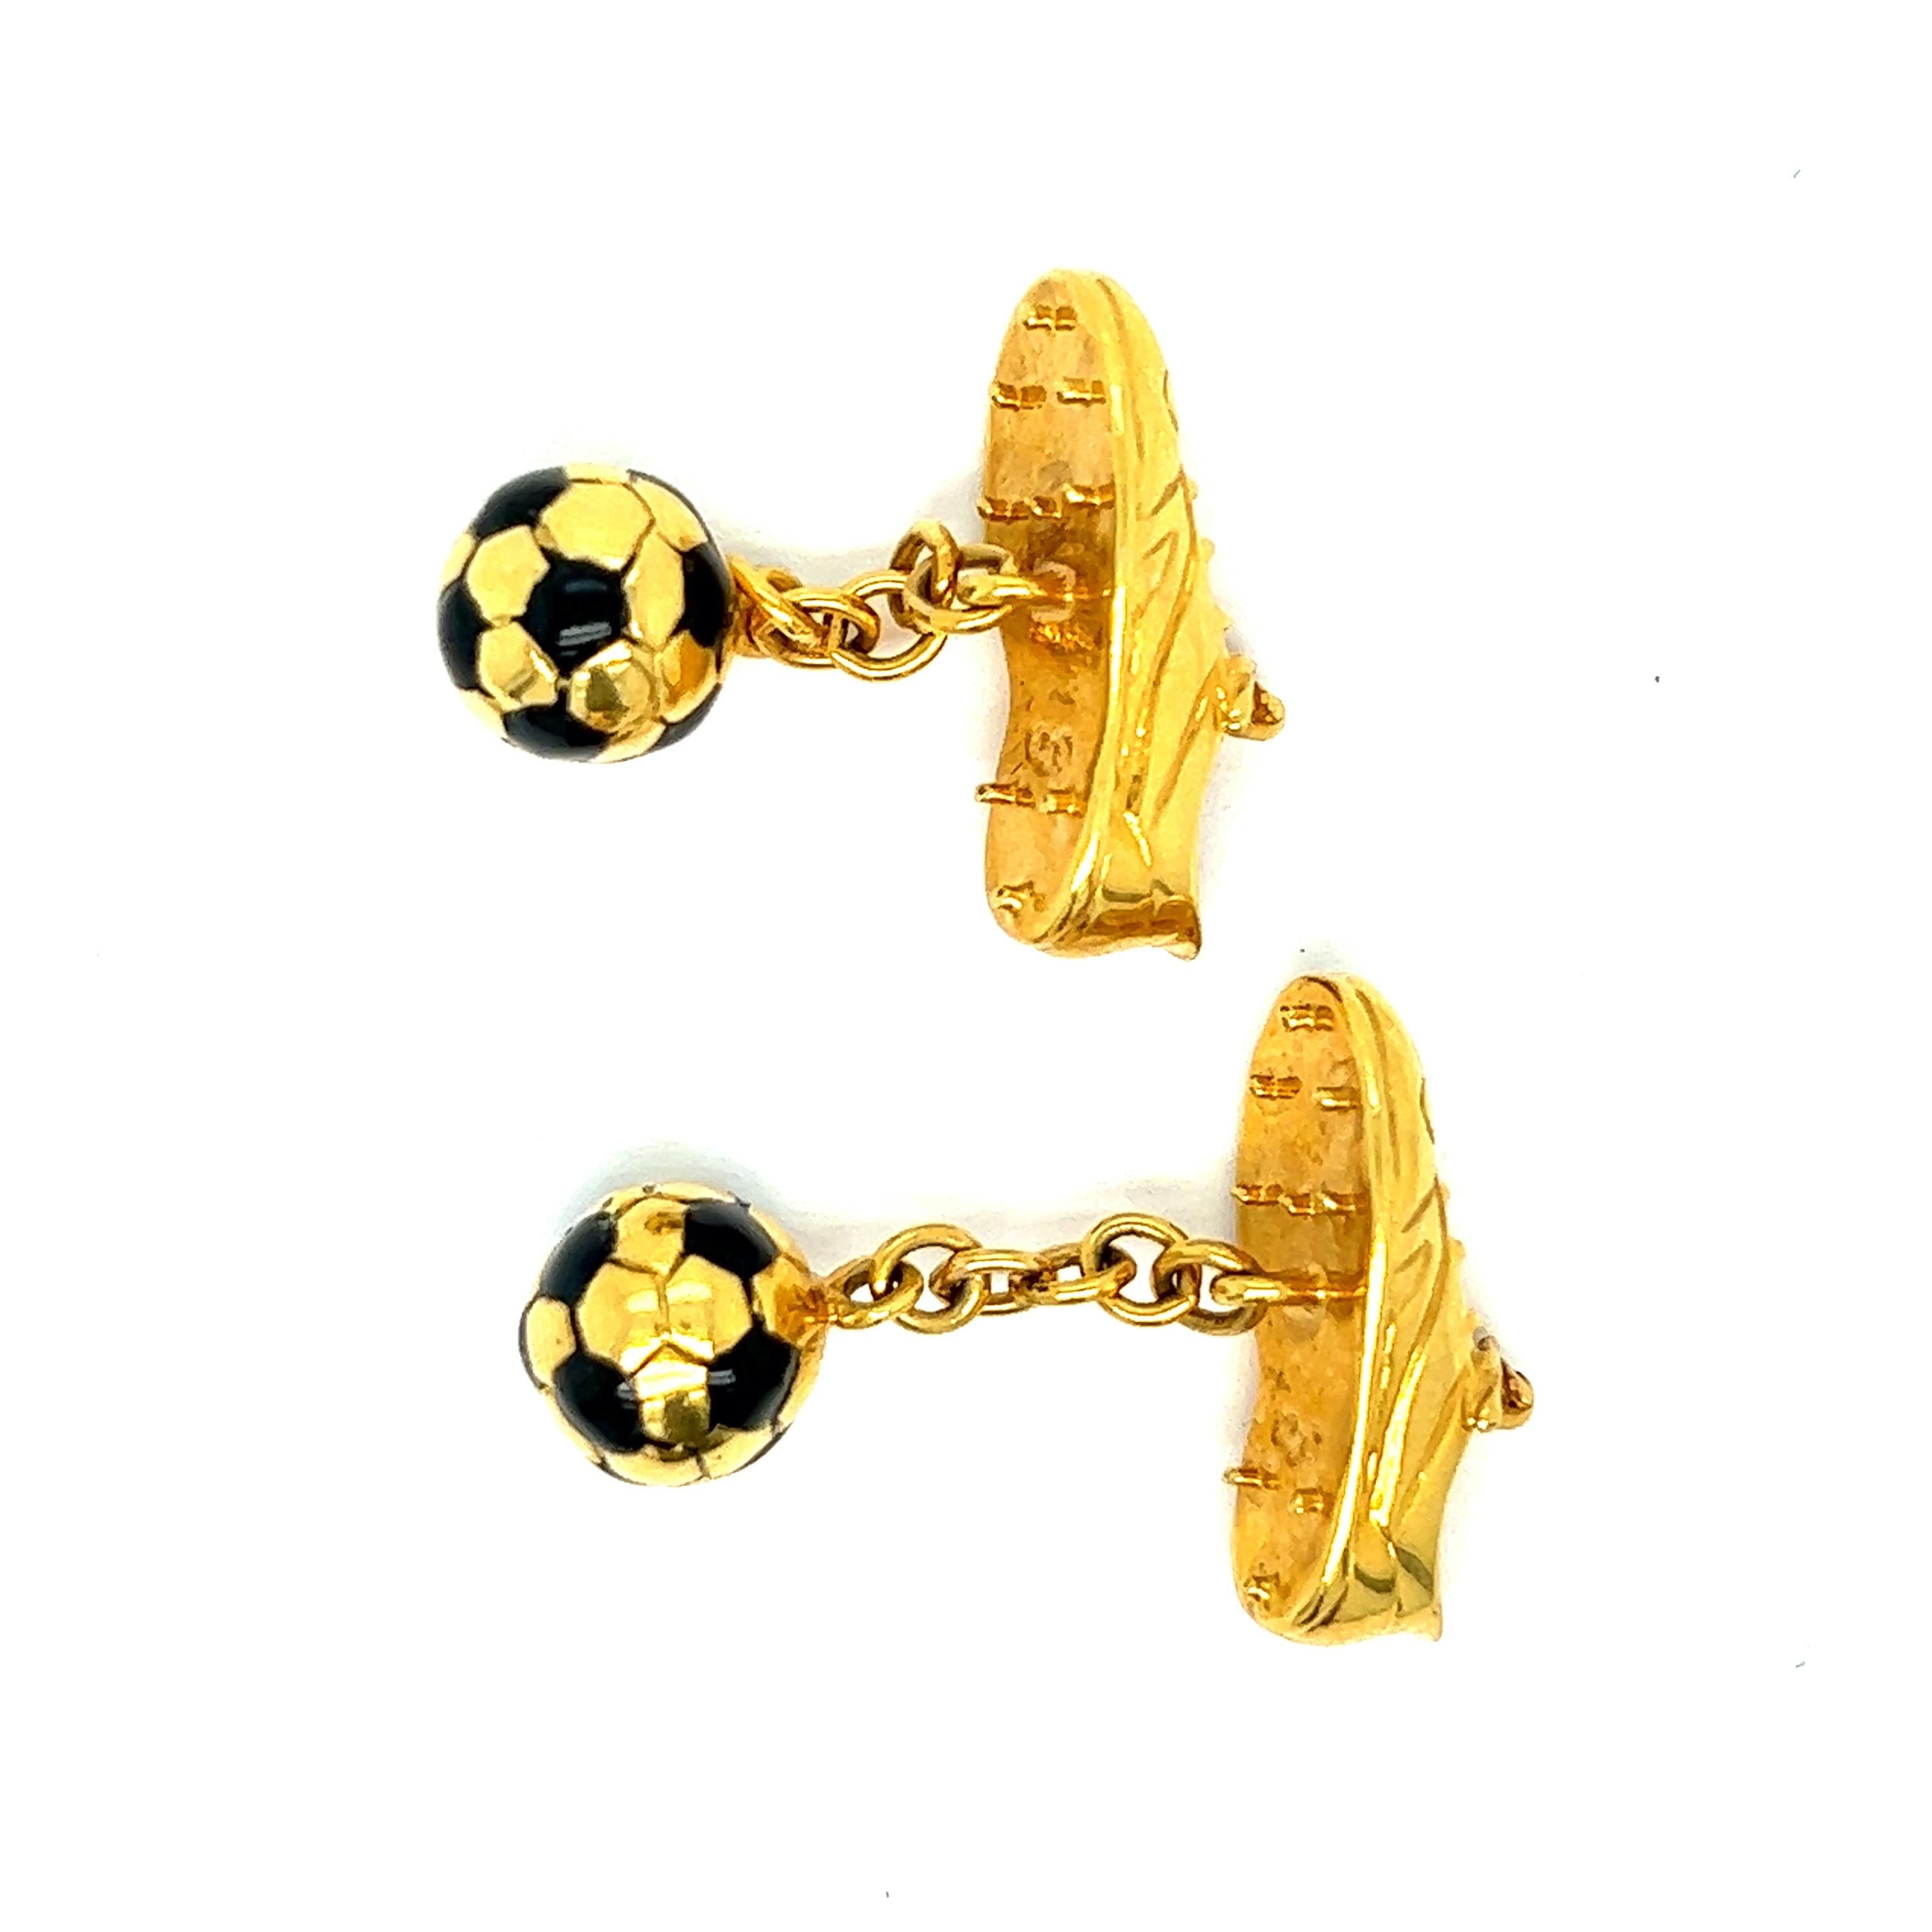 Pair of Link of London 18k gold cufflinks, featuring soccer sneakers and balls. Sneaker measures 23mm x 9mm,  Ball - 10mm. Hallmarked with 3 circle links - the hallmark of the designer. Weight - 31.3 grams. 